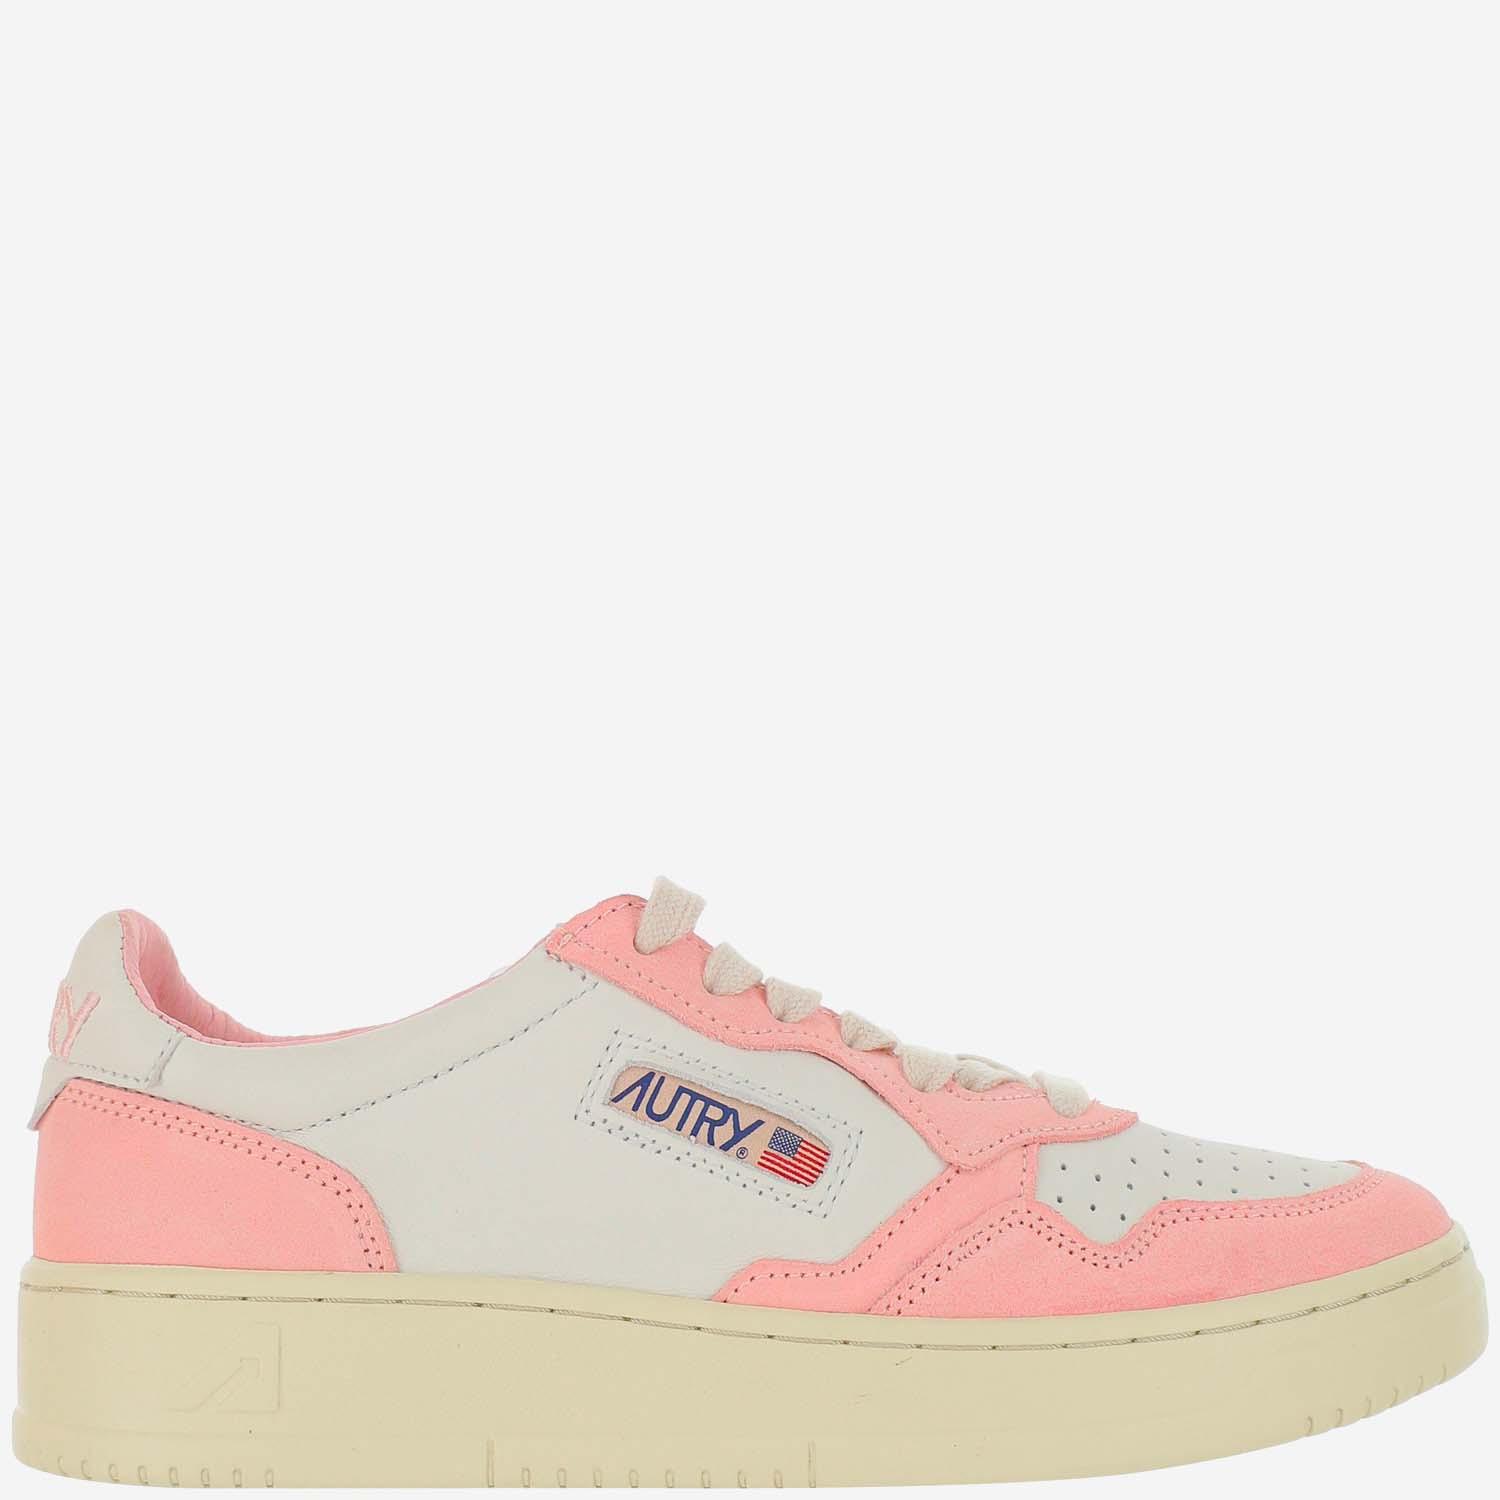 Autry Low Medalist Sneakers in Pink | Lyst